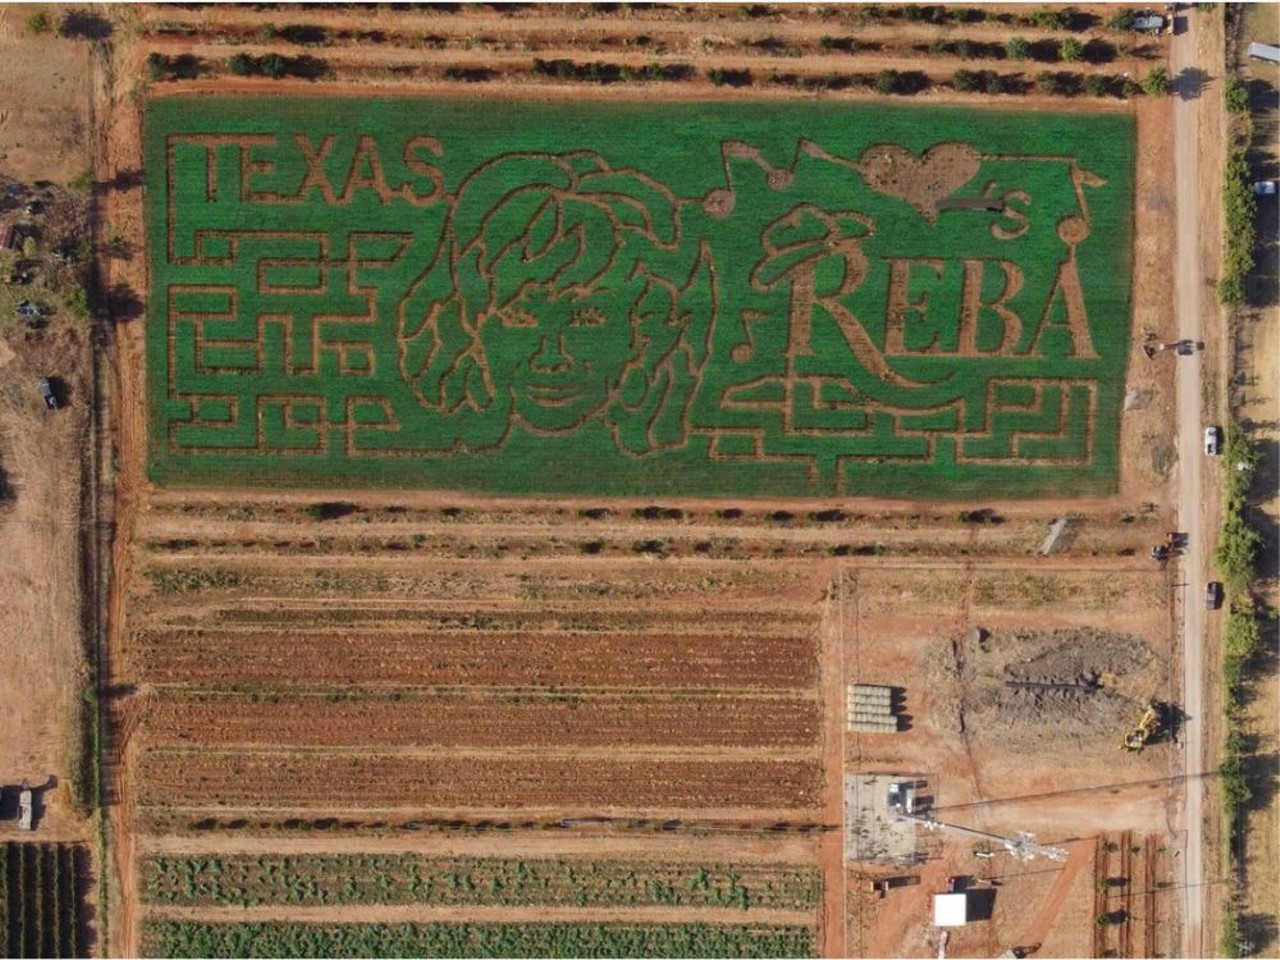 Jenschke Orchards
8301 East U.S. Hwy. 290, Fredericksburg, (830) 997-8422, bestfredericksburgpeaches.com
Jenschke Orchards’ 2023 corn maze honors country icon Reba McEntire. In addition to the 5-acre maze, fall season activities at Jenschke include wagon rides, a pick your own pumpkin patch, a corn pit and barnyard rollers.